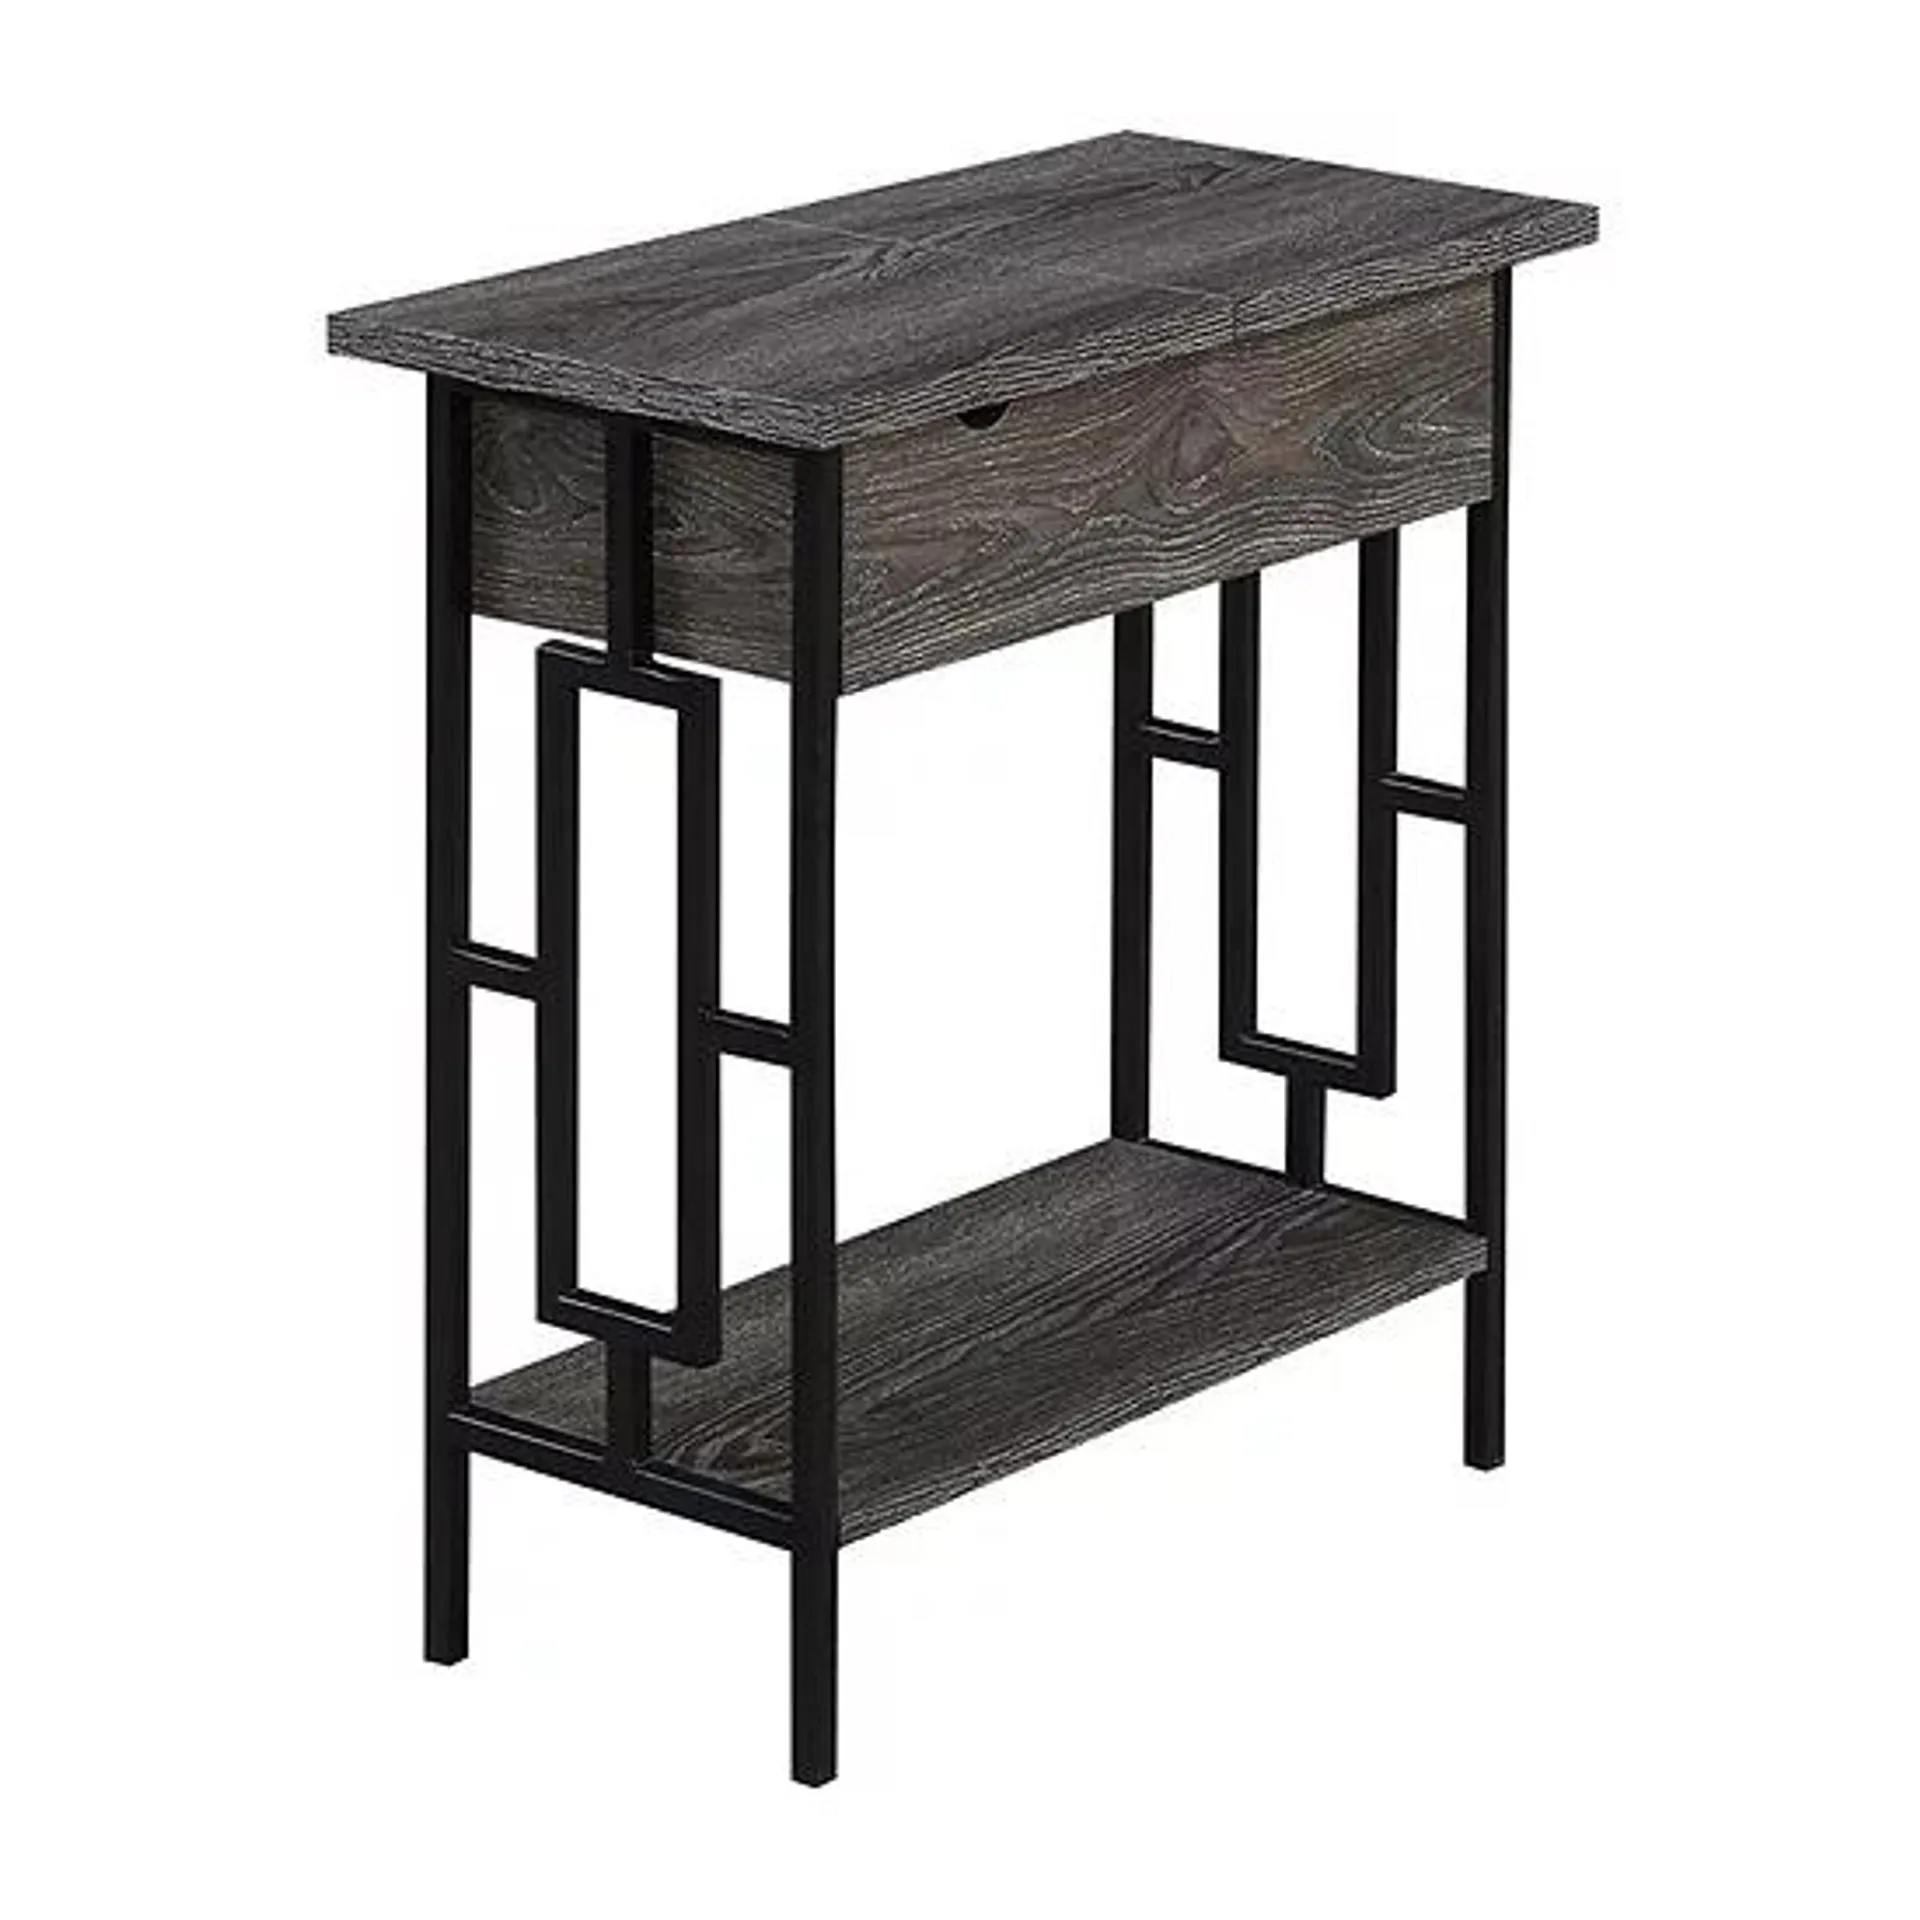 Town Square Living Room Collection End Table